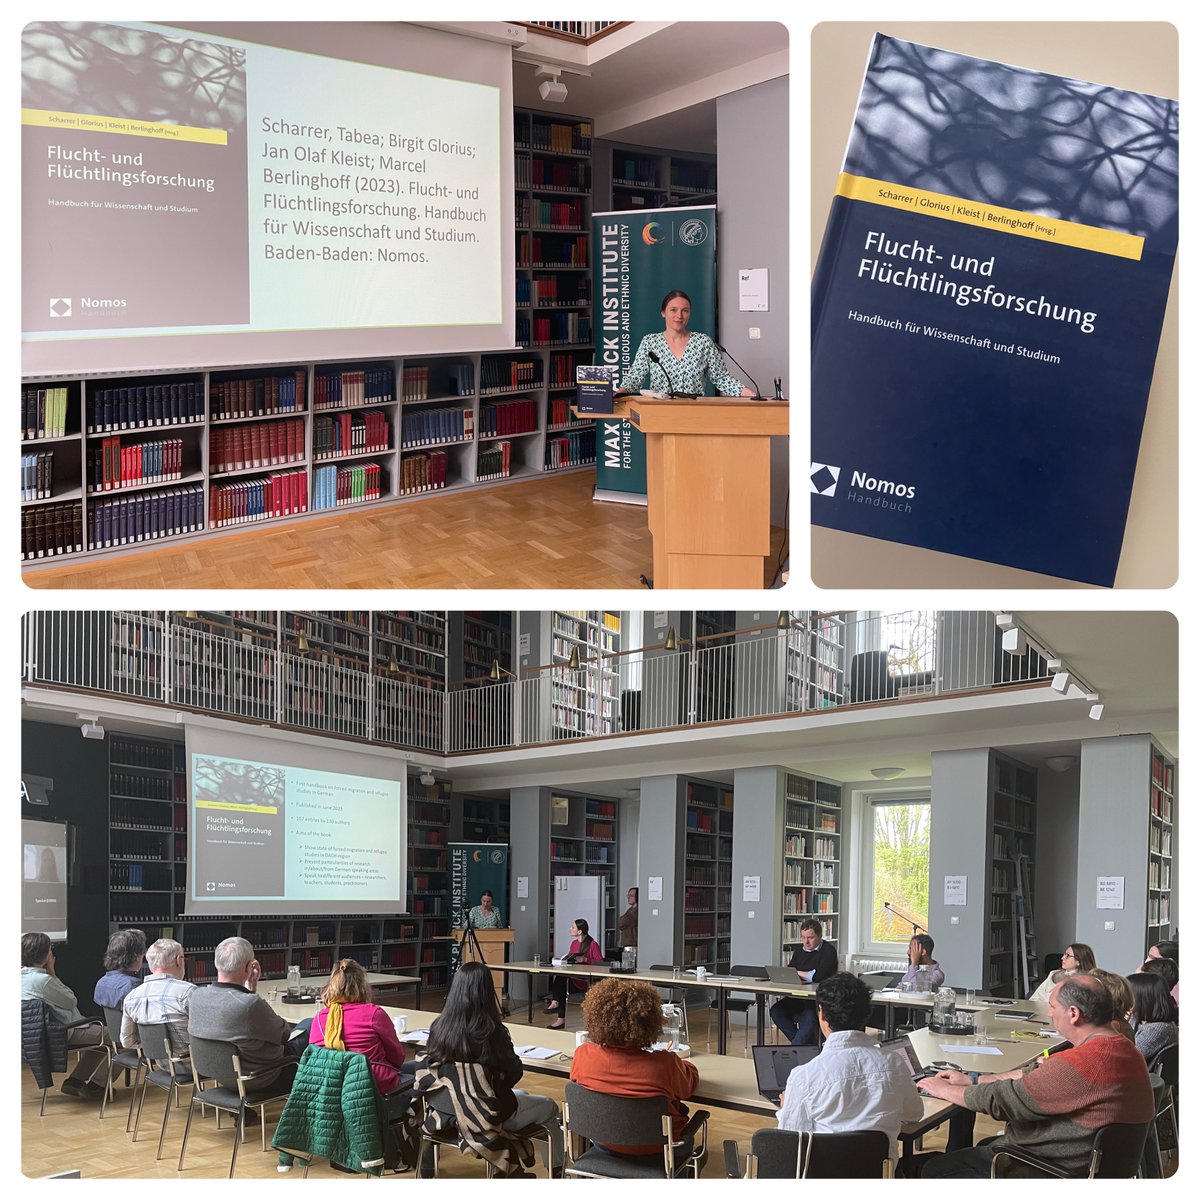 Great talk today by @TabeaScharrer on this very ambitious German-language handbook on forced migration research, which she co-edited. In over 100 chapters by 130 authors, it gives an overview of this very broad & interdisciplinary field of research #Flucht #Flüchtlingsforschung